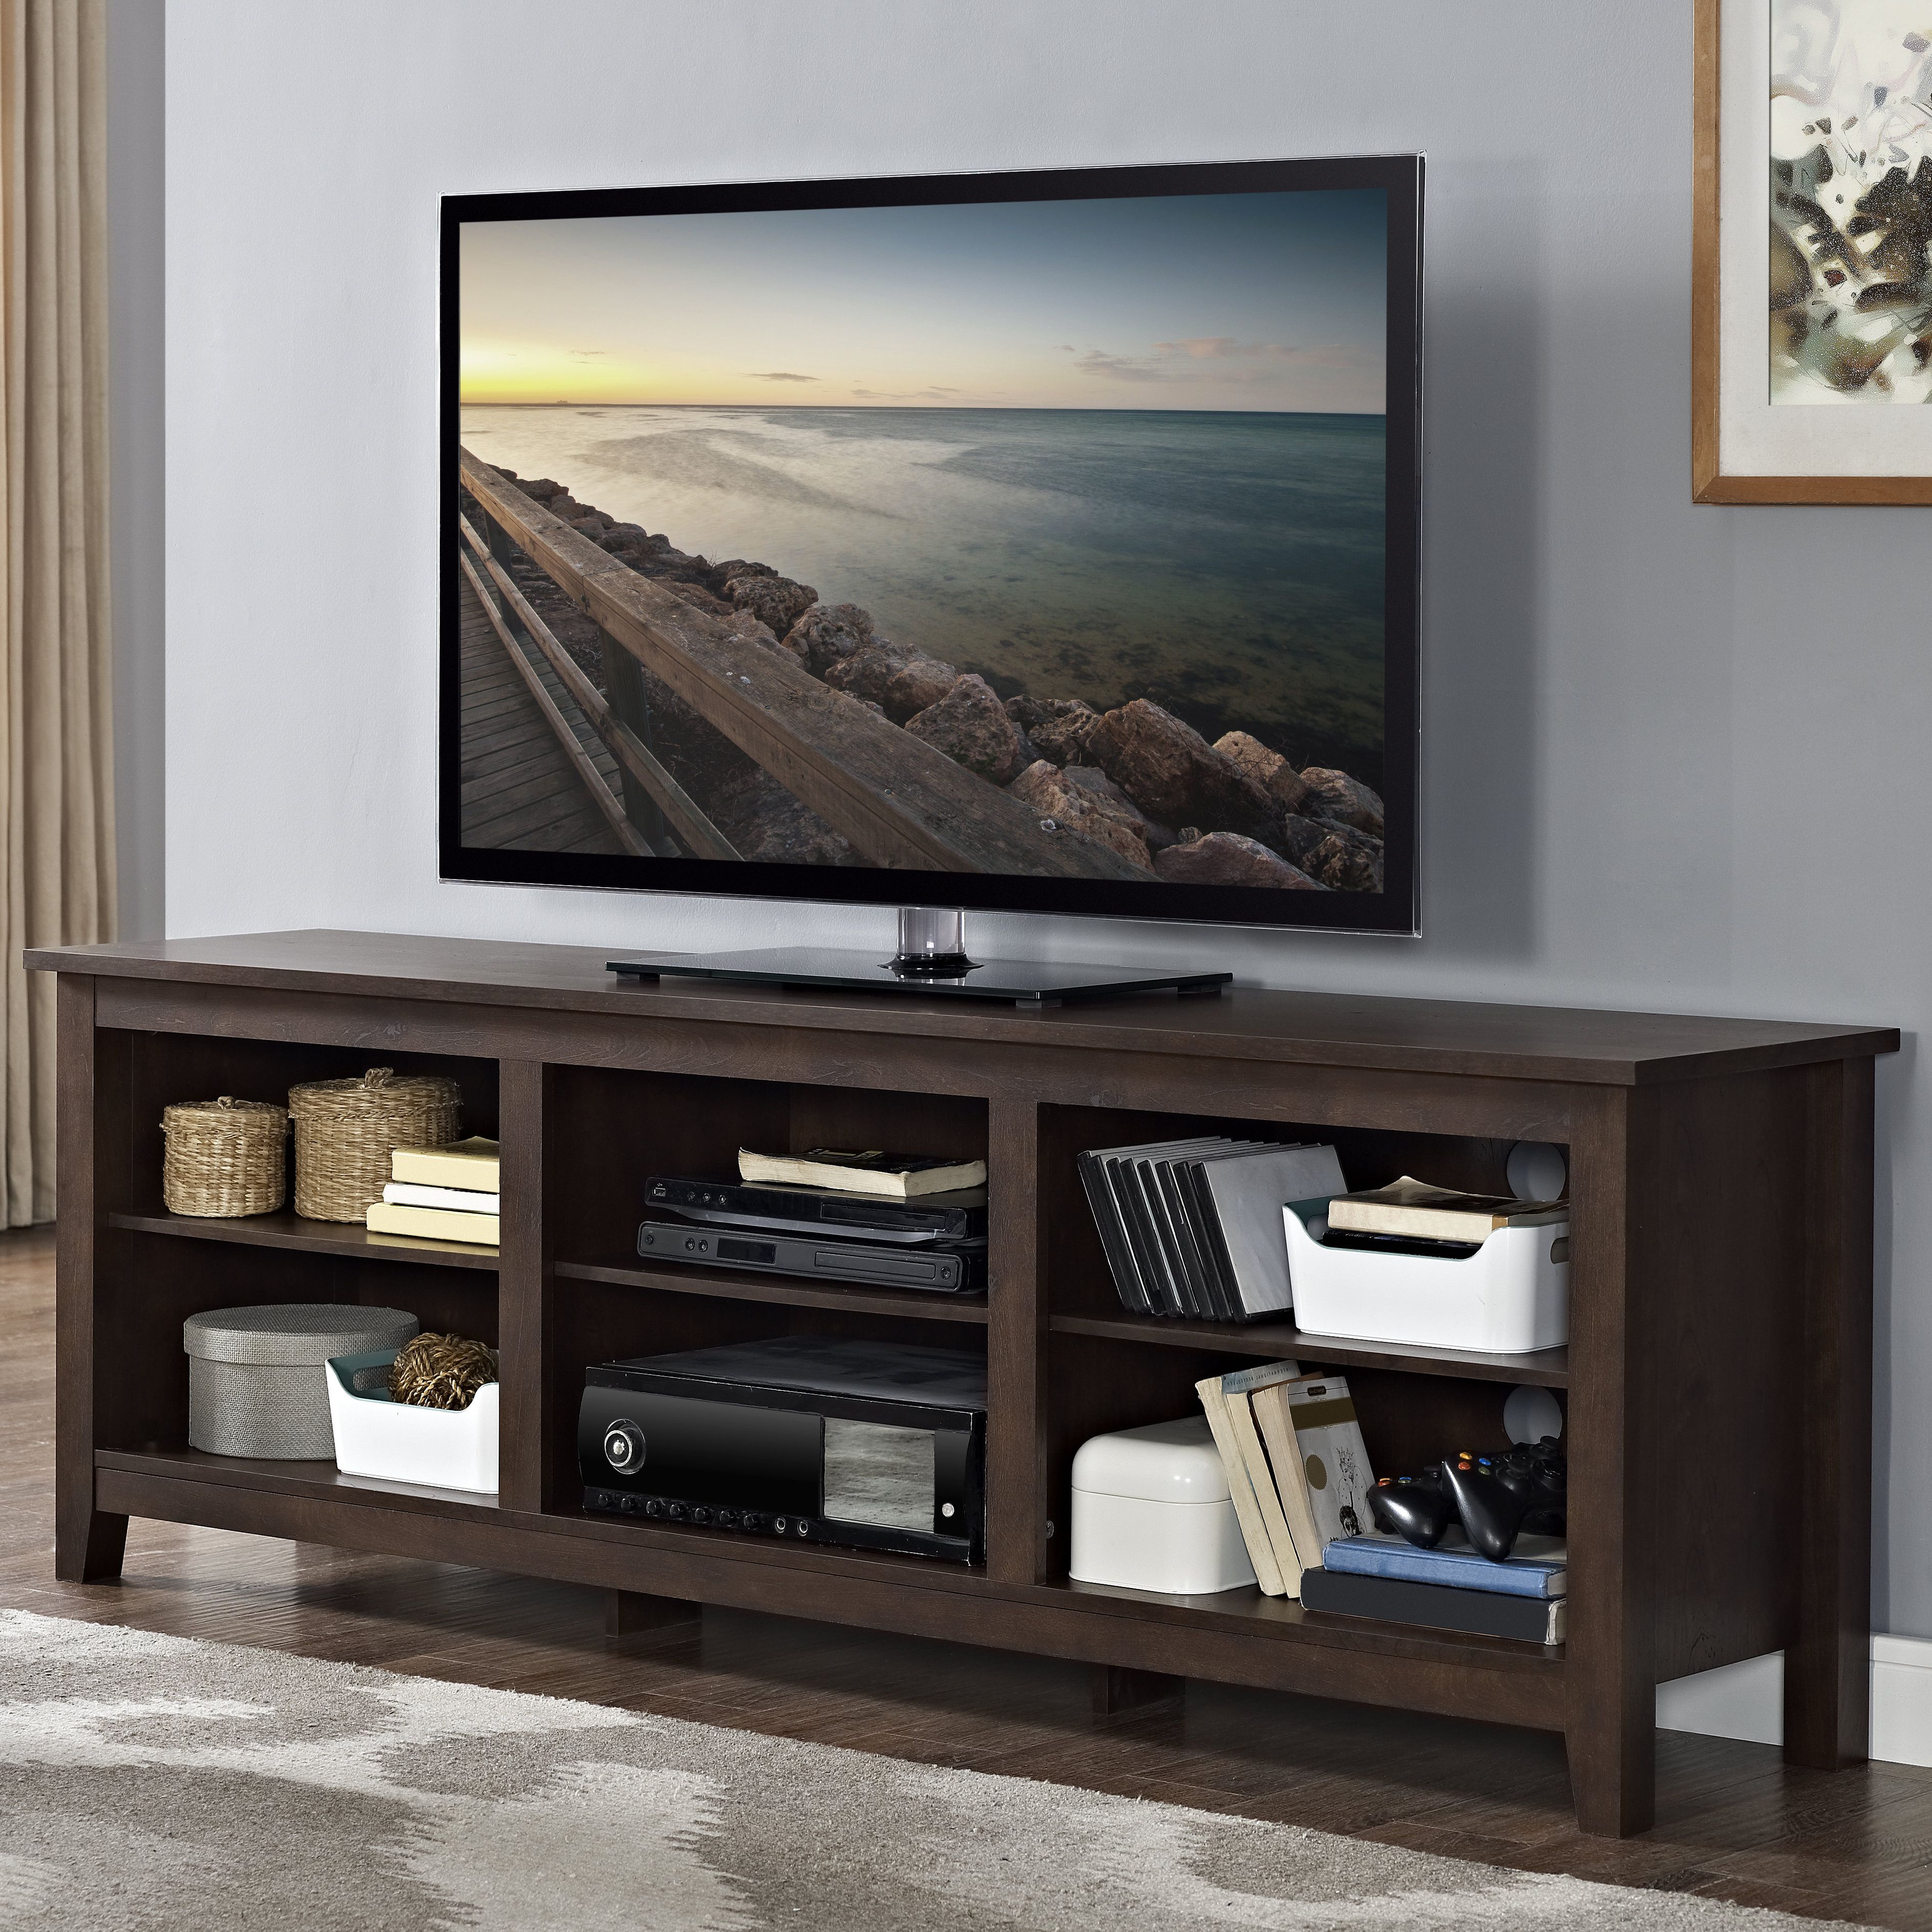 Wayfair In Widely Used Tv Cabinets And Coffee Table Sets (View 6 of 20)